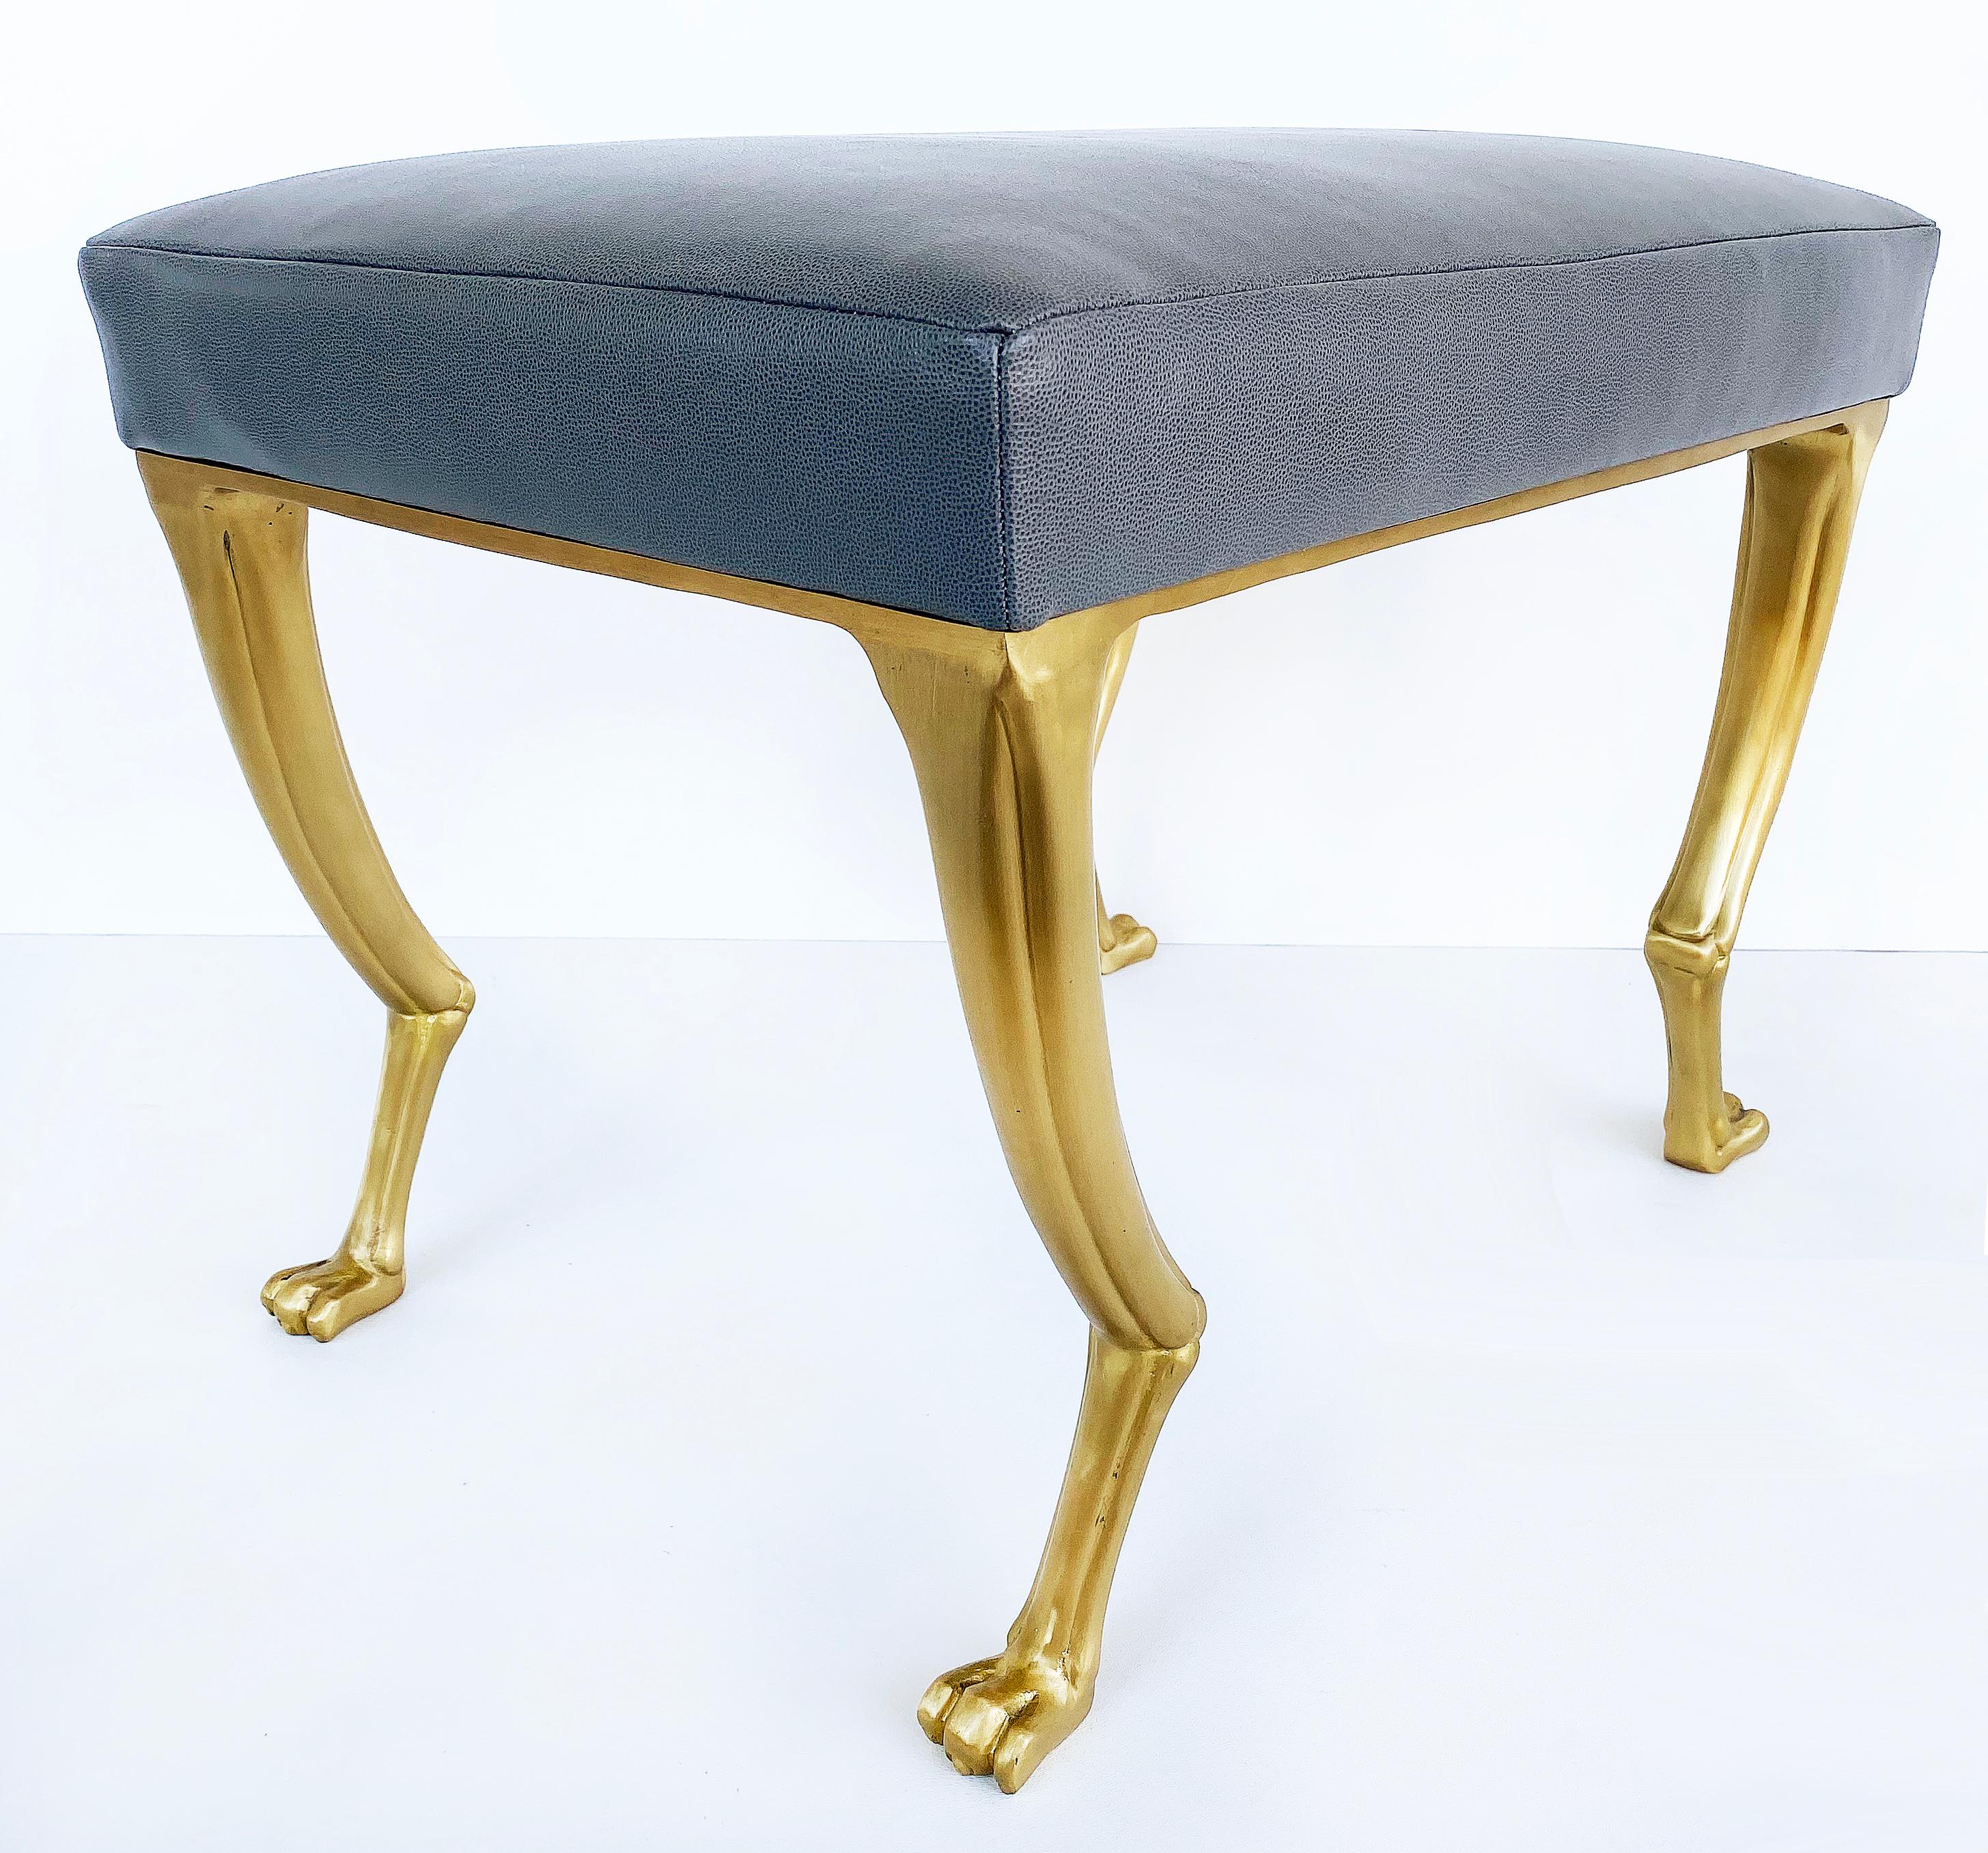 Ironies cast gilt bronze pantieres bench with paw feet and animal legs

Offered for sale is an elegant gilt-bronze Pantieres Bench created with four animal legs and paw feet. The substantial bench is upholstered in an unusual leather patterned